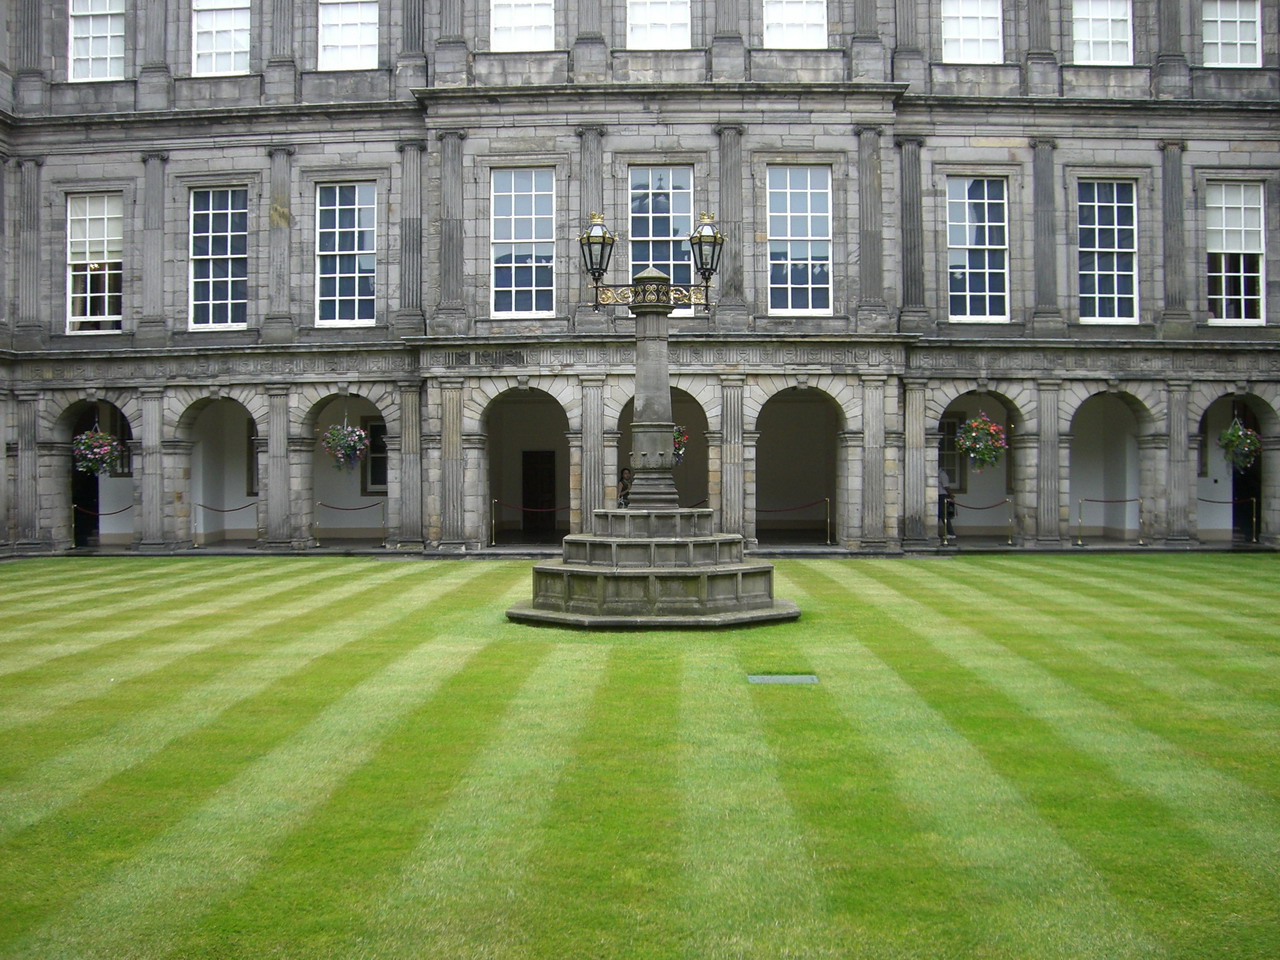 the outside of a large building with a fountain in a front lawn